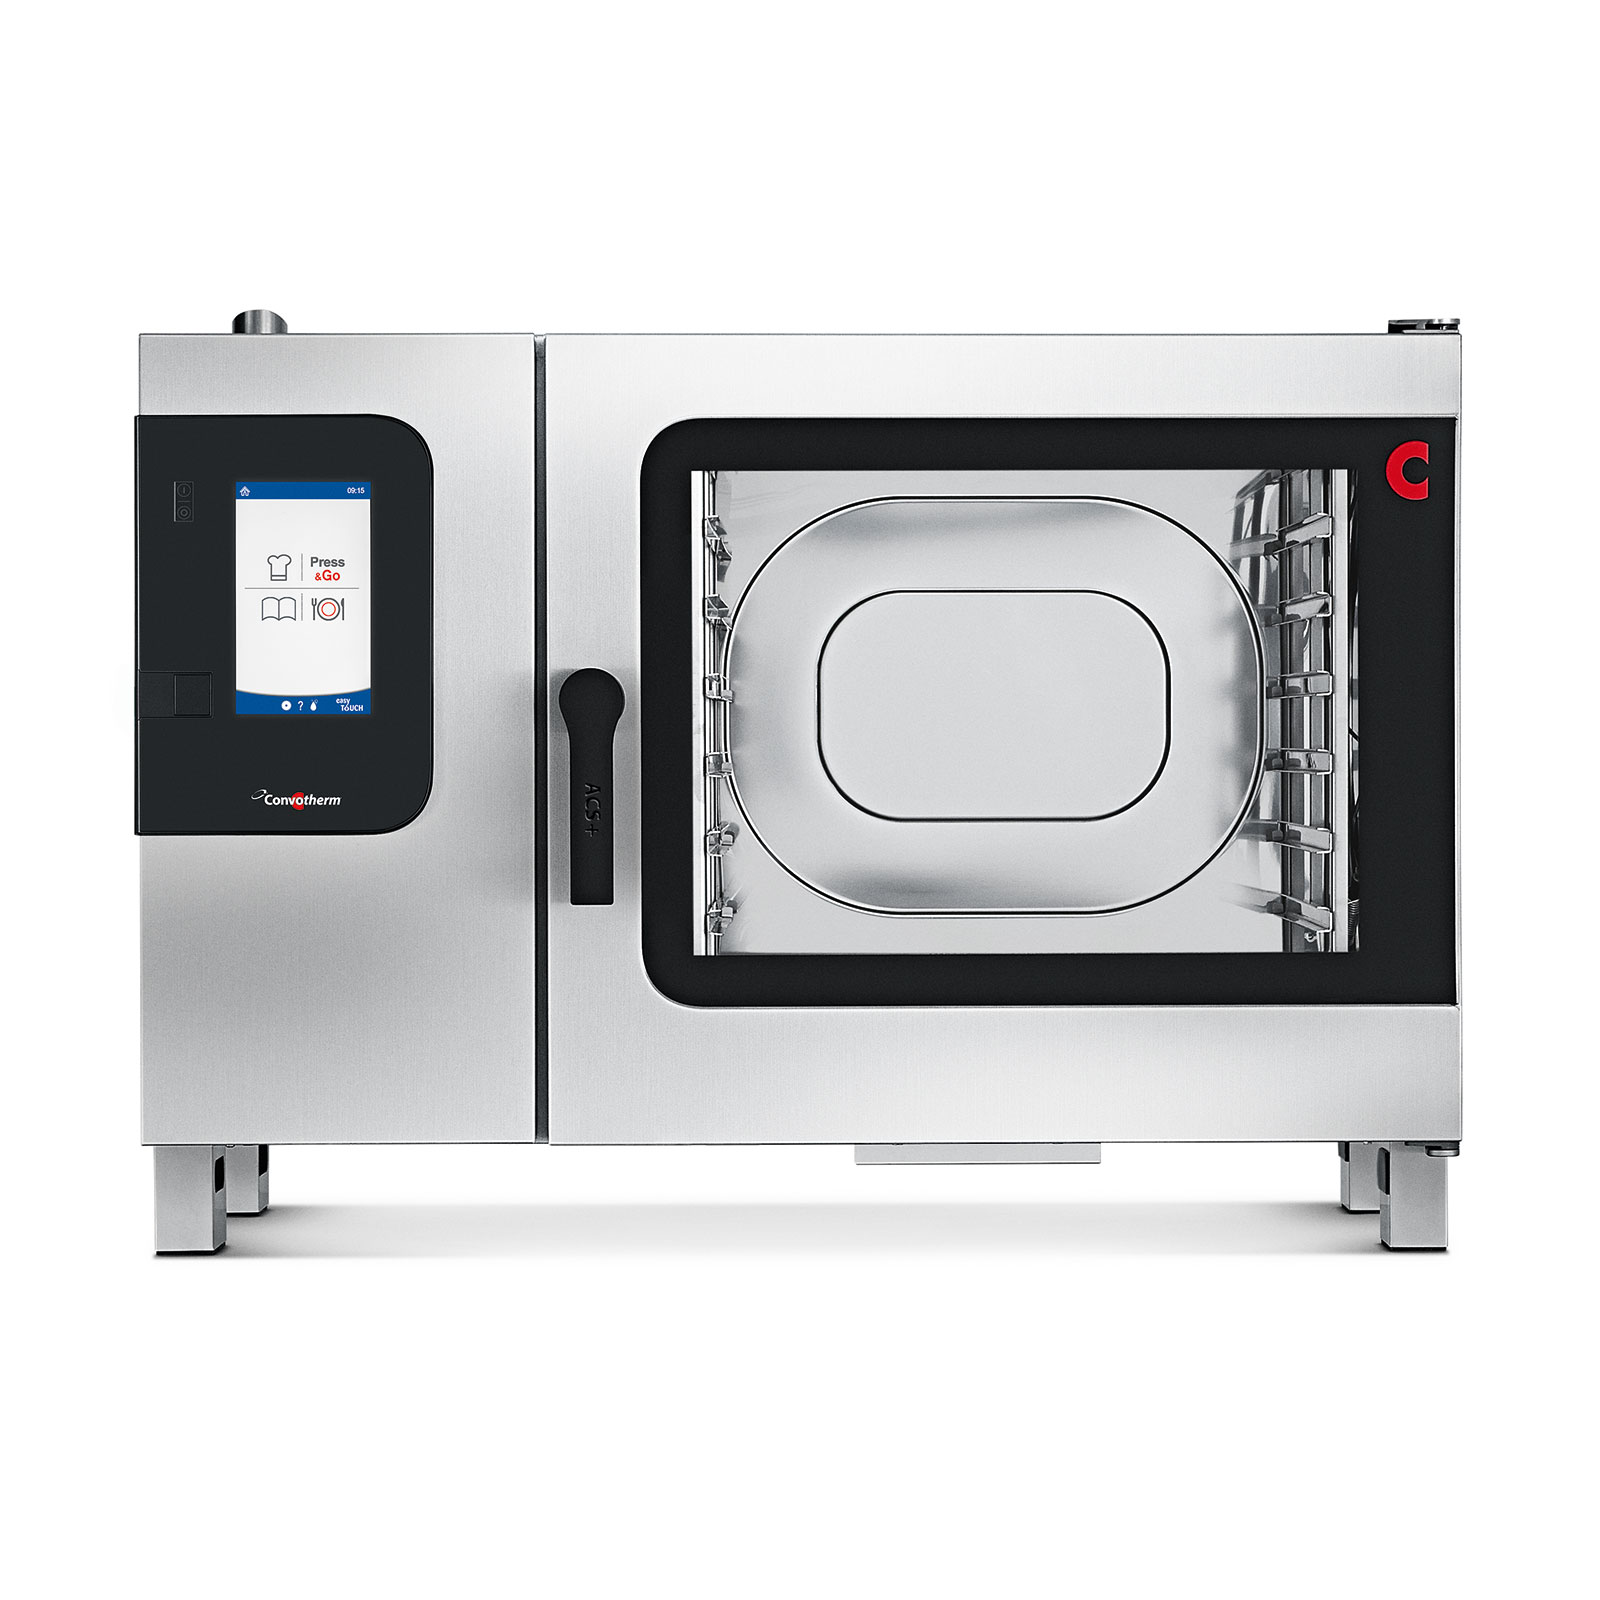 Convotherm C4ET6.20EB RH Full-Size Electric Combi Oven w/ Programmable Controls, Steam Generator, 208-240v